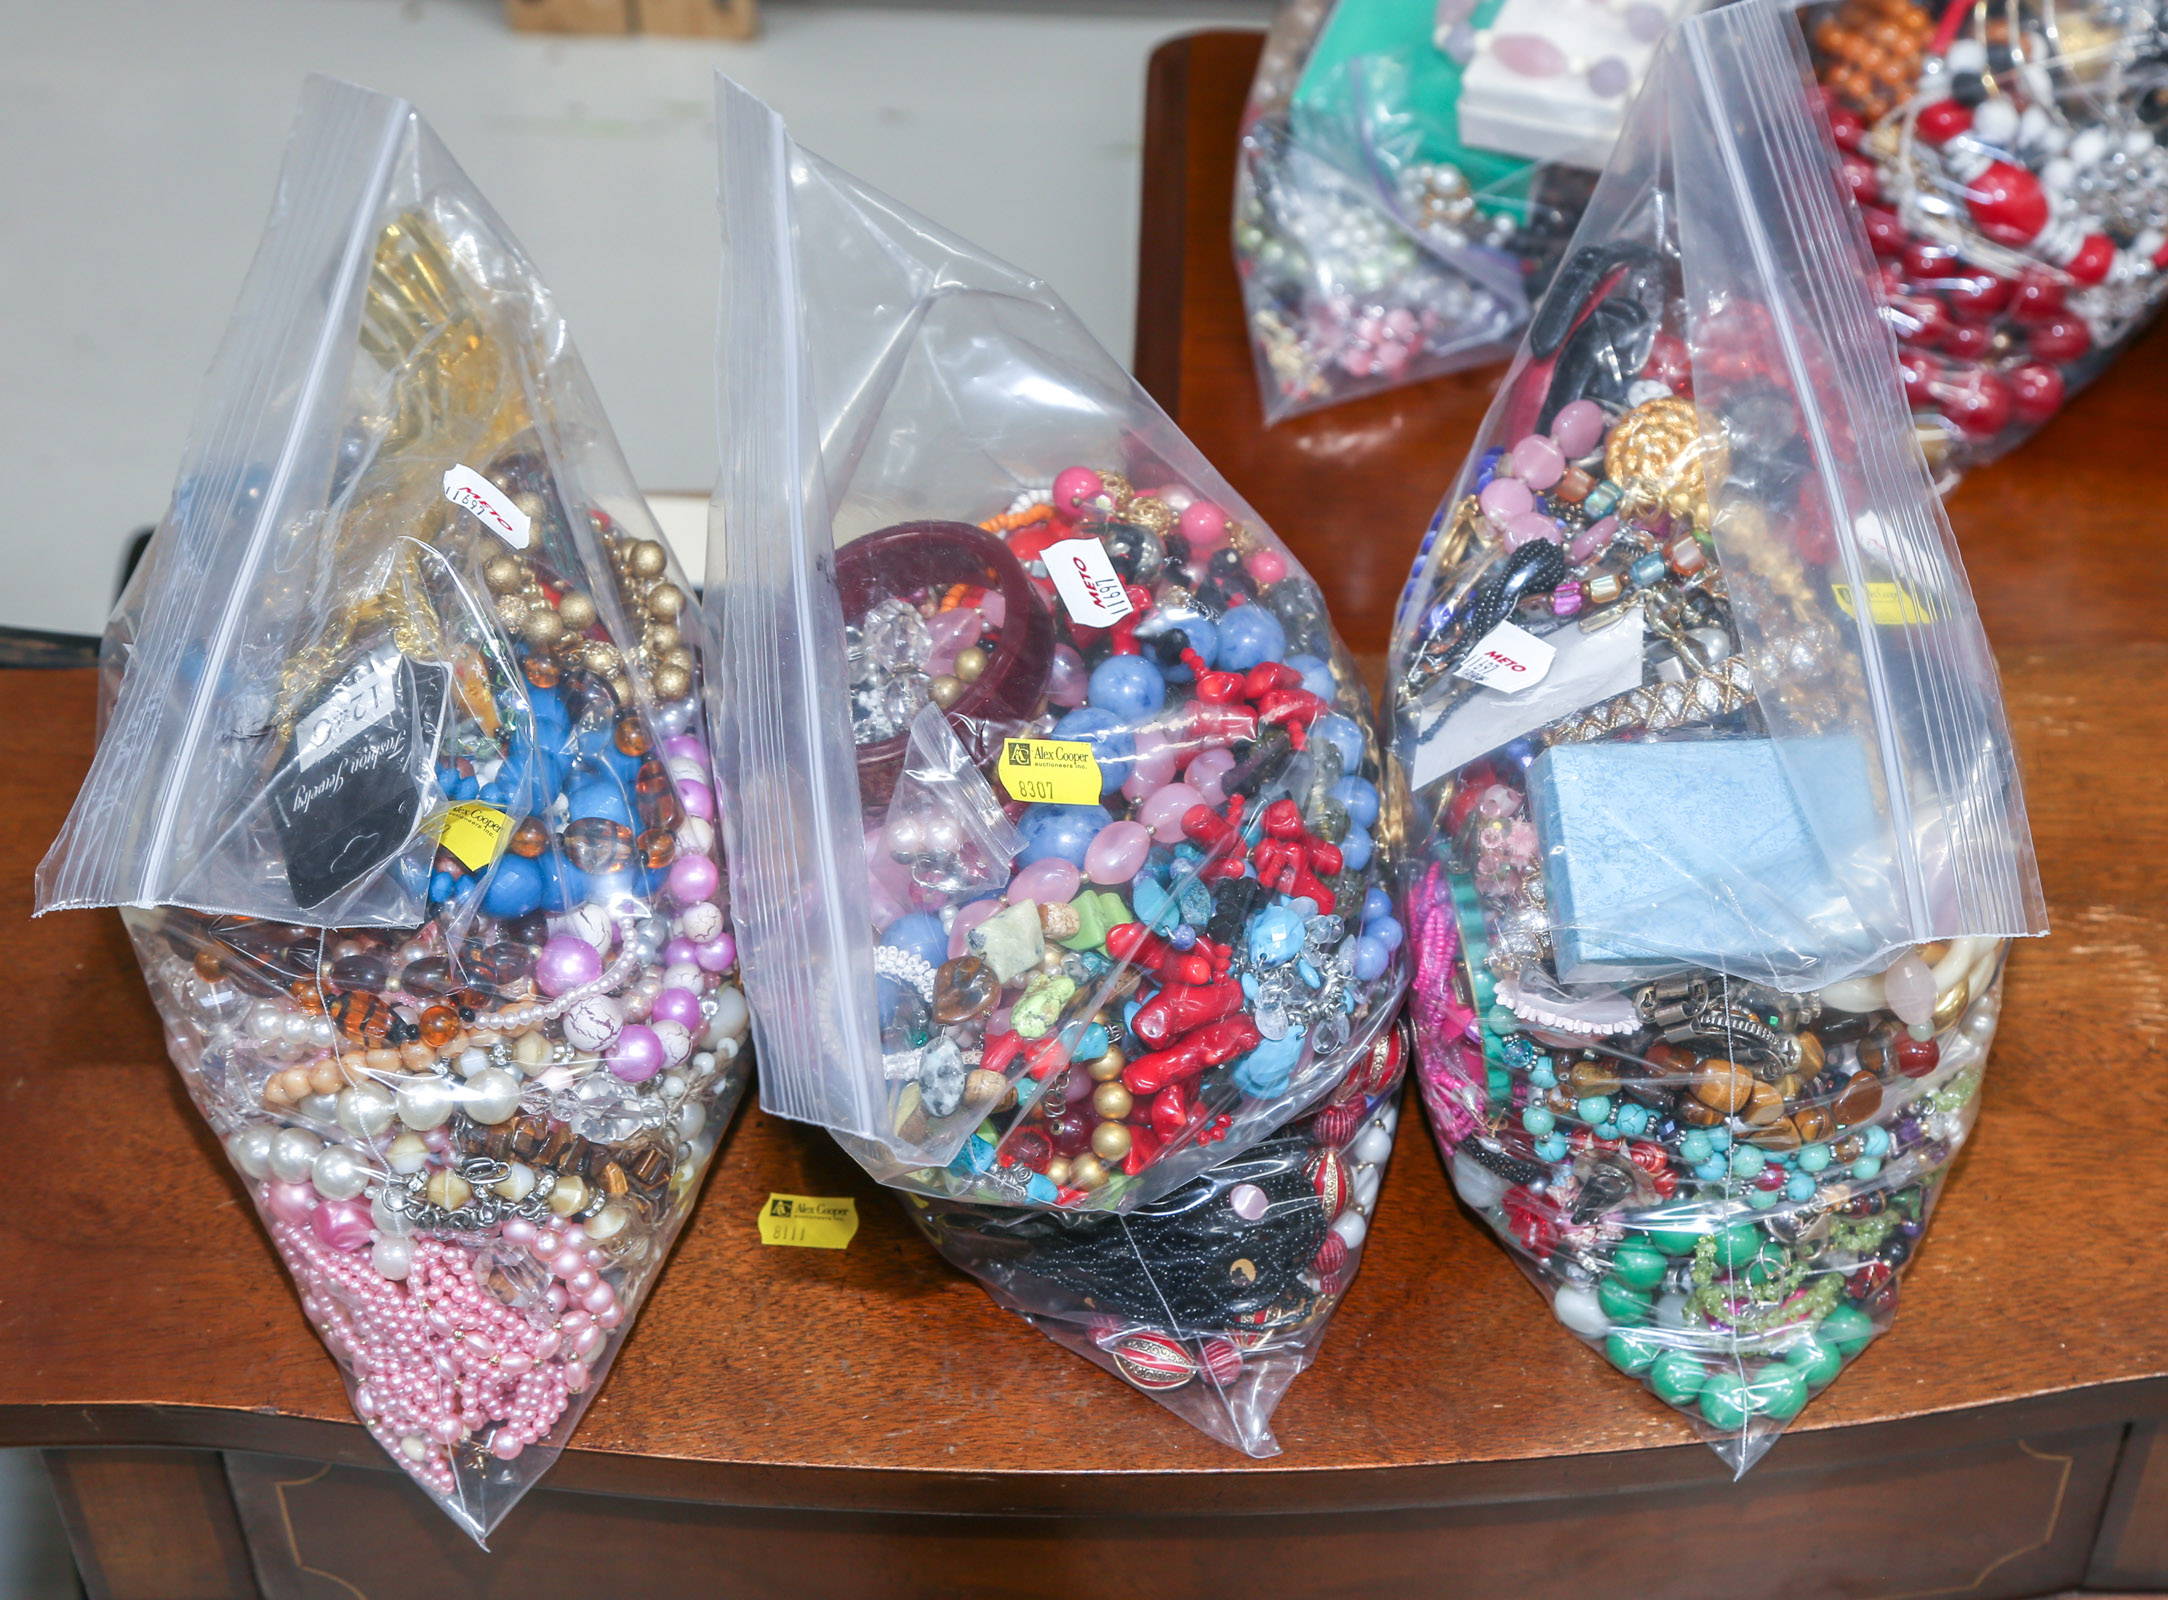 THREE BAGS OF COSTUME JEWELRY Including 2e9d0a